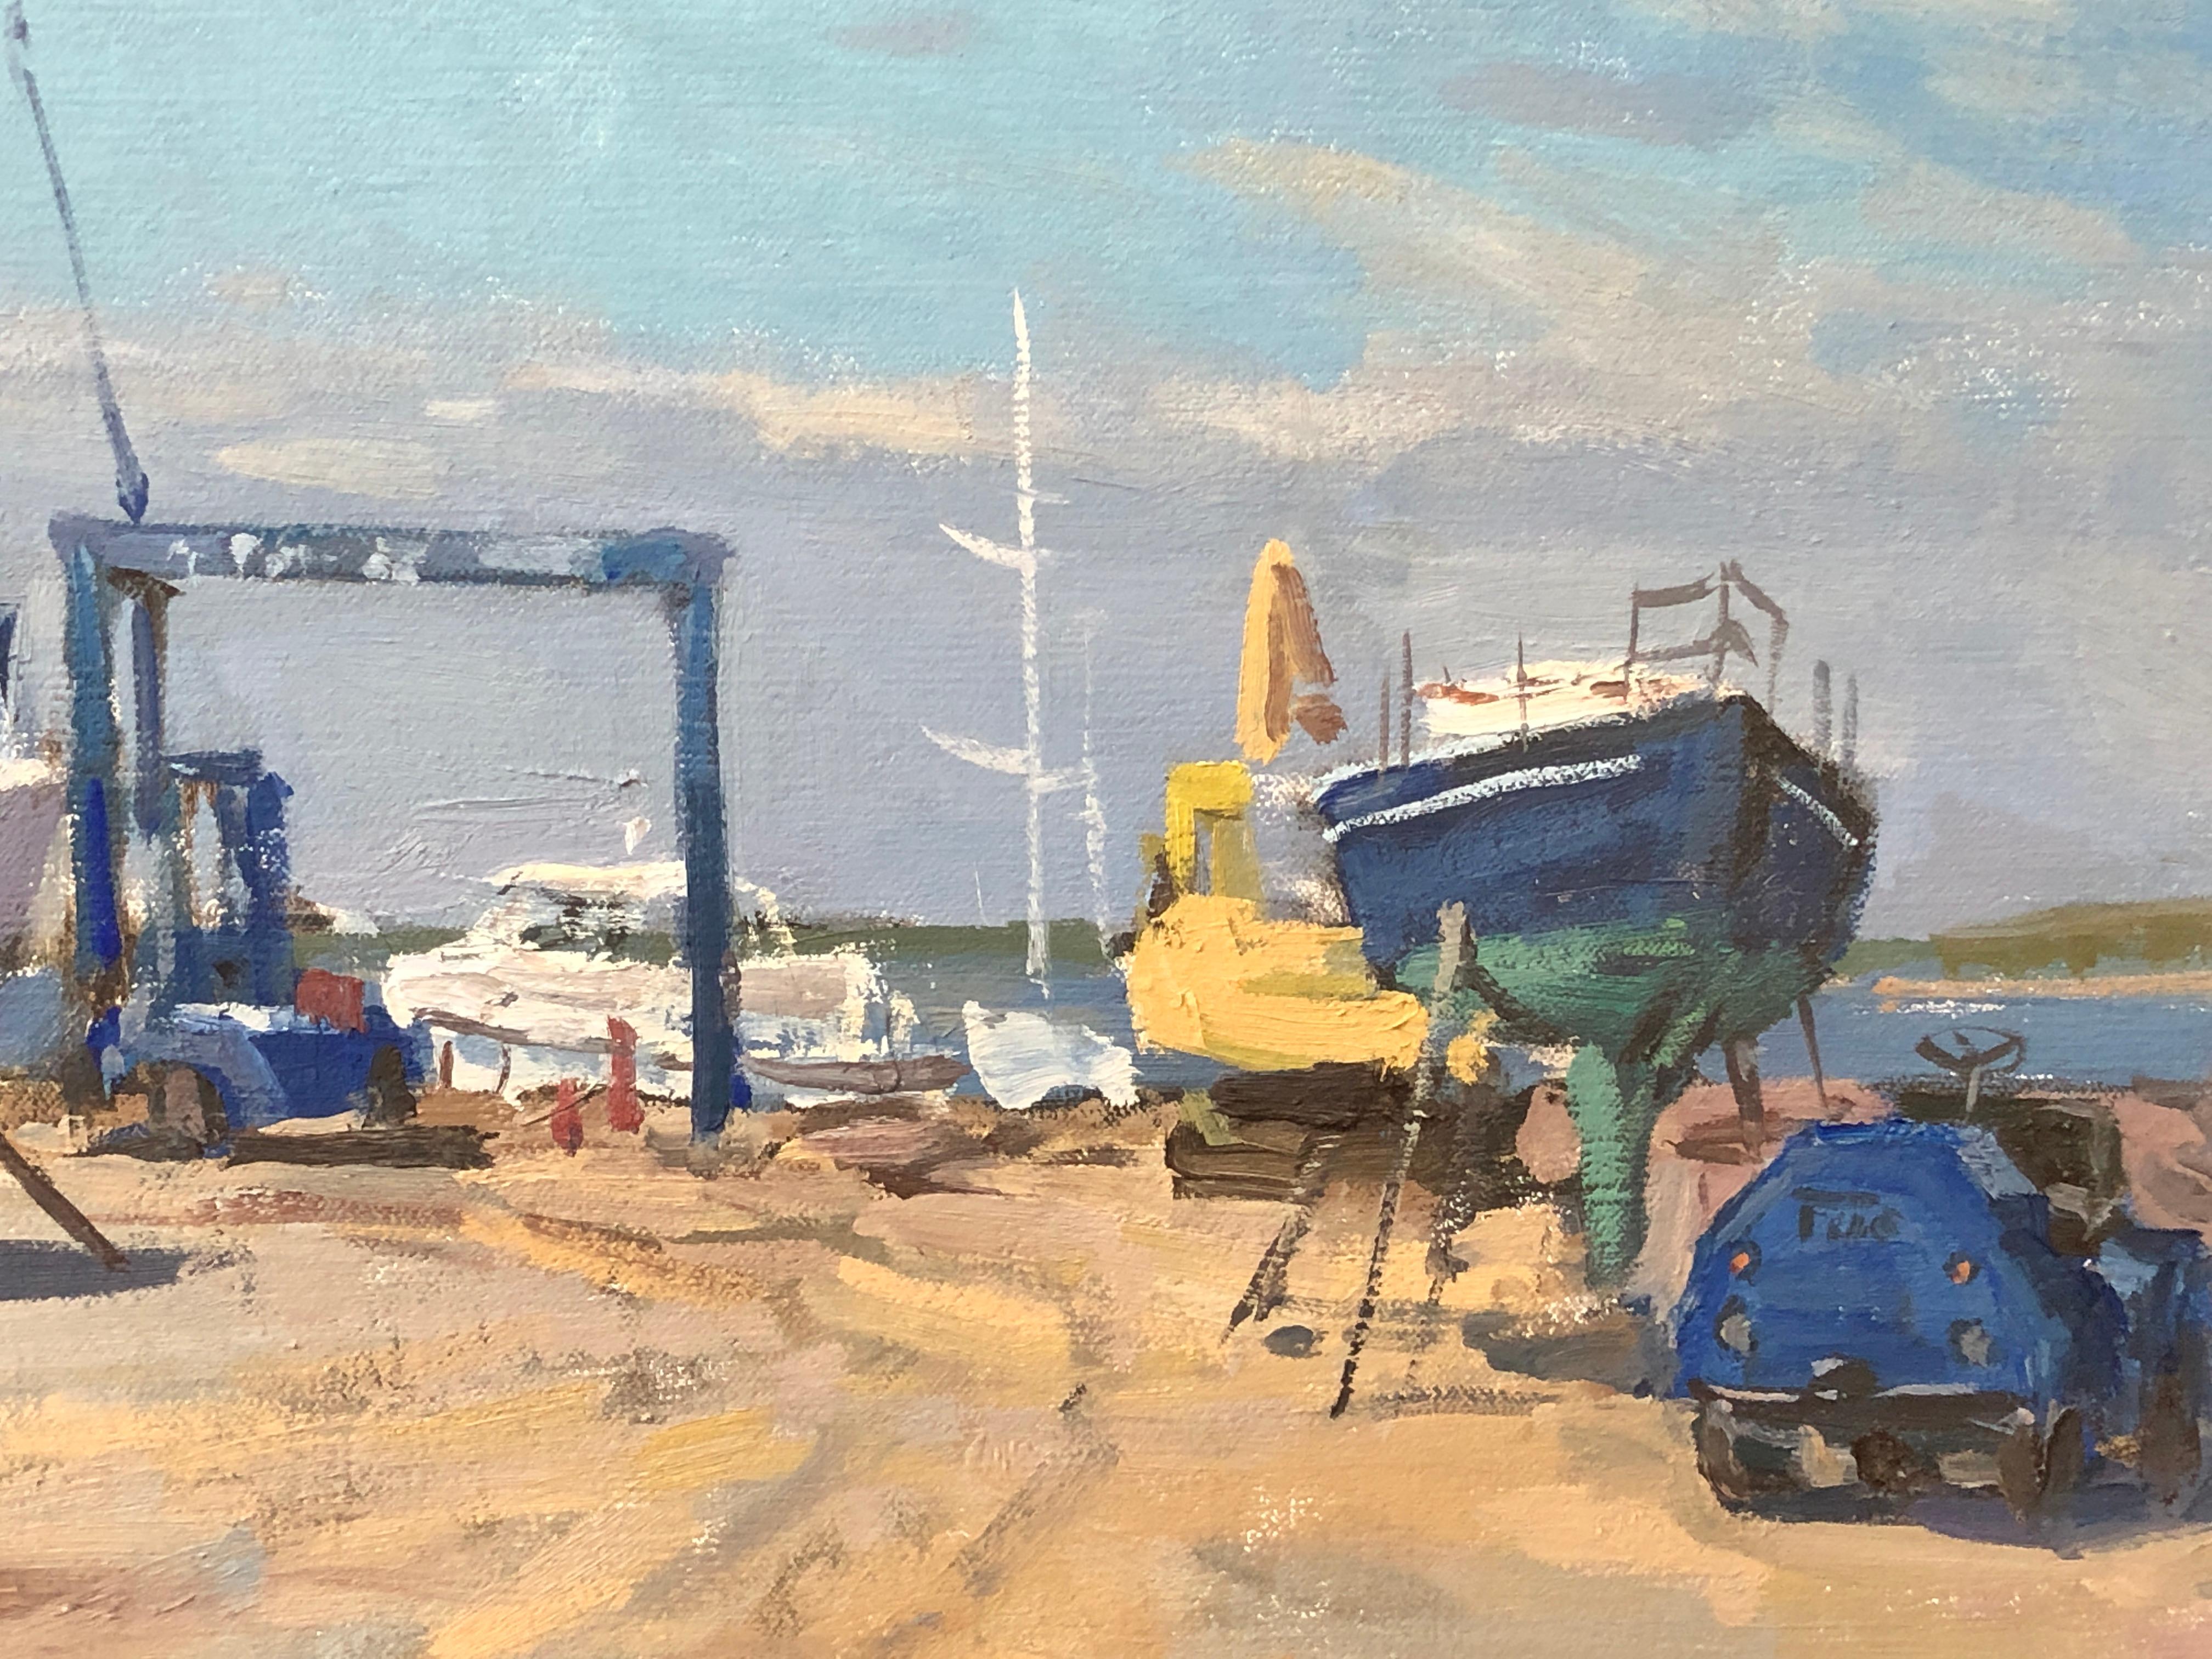 Painted en plein air in Sag Harbor, New York. This contemporary oil painting depicts sailboats at rest, tucked away during early spring at the yacht yard on Bay Street. Vast blue skies above, and trails of movement tracked in the dirt below.

Victor